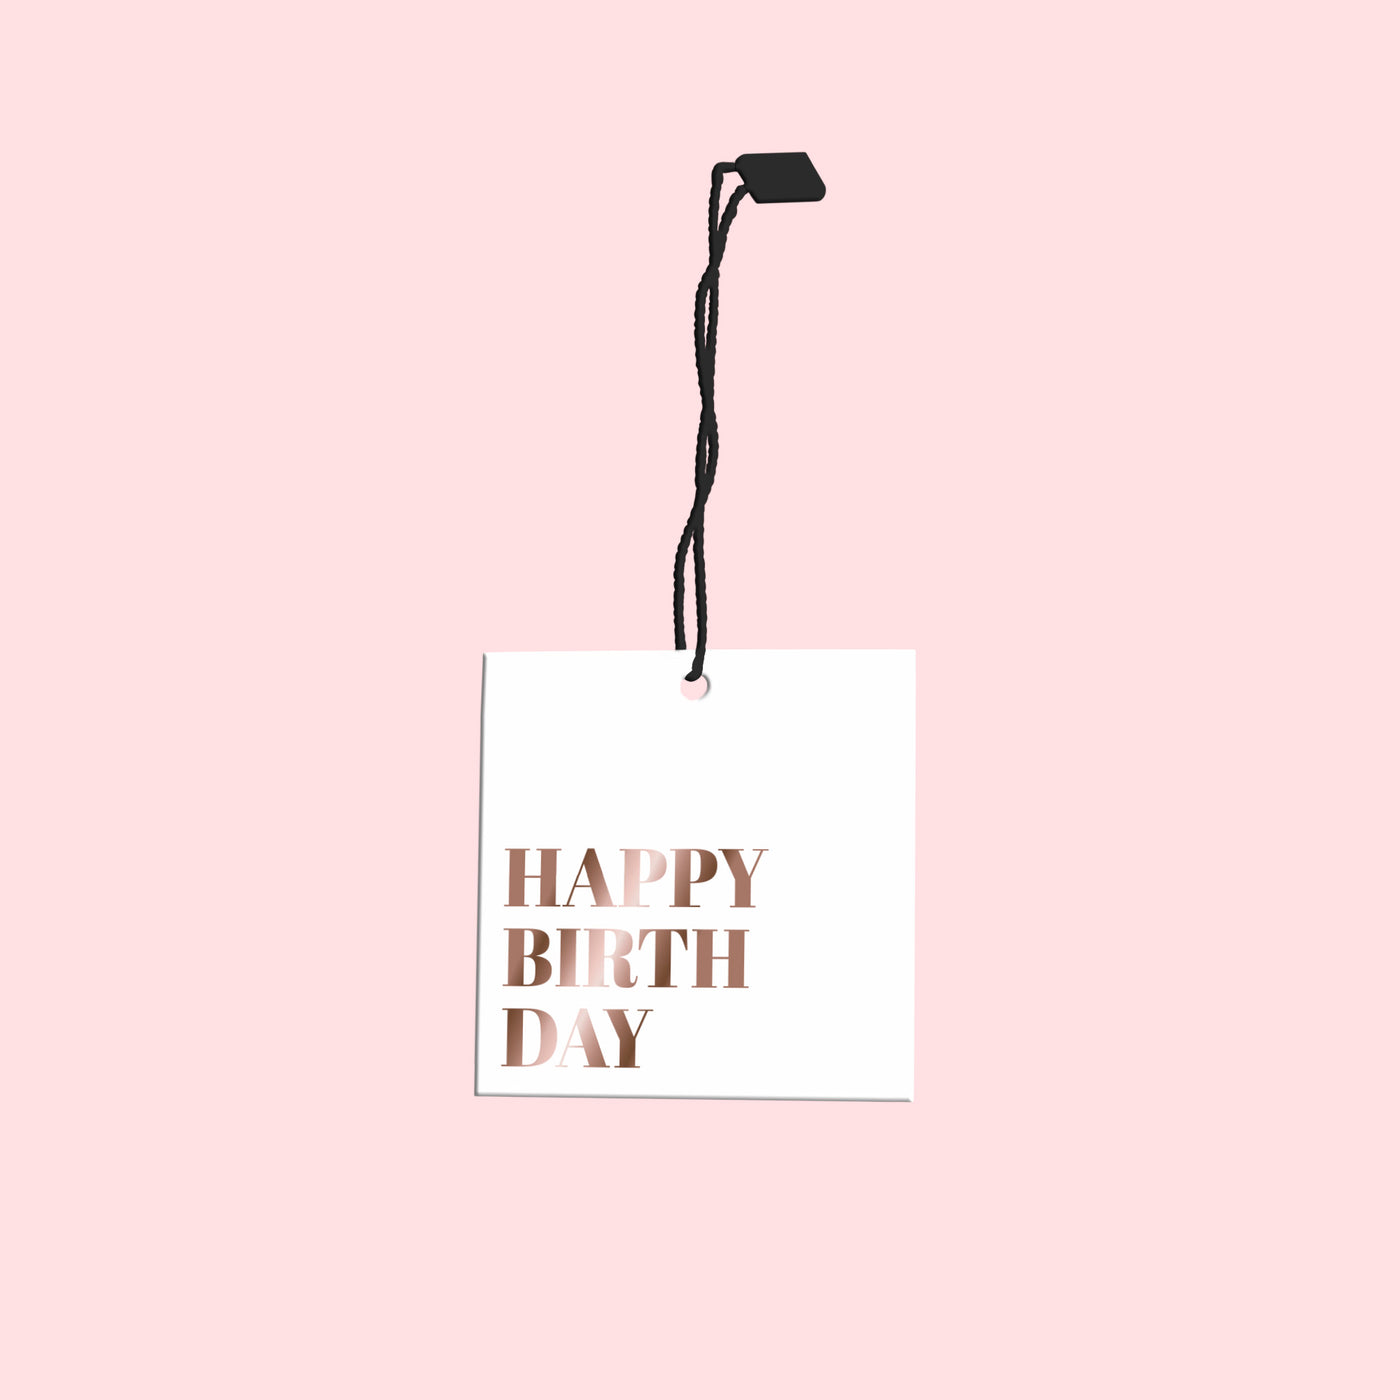 Rose Gold Foiled Swing Tag - Happy Birthday